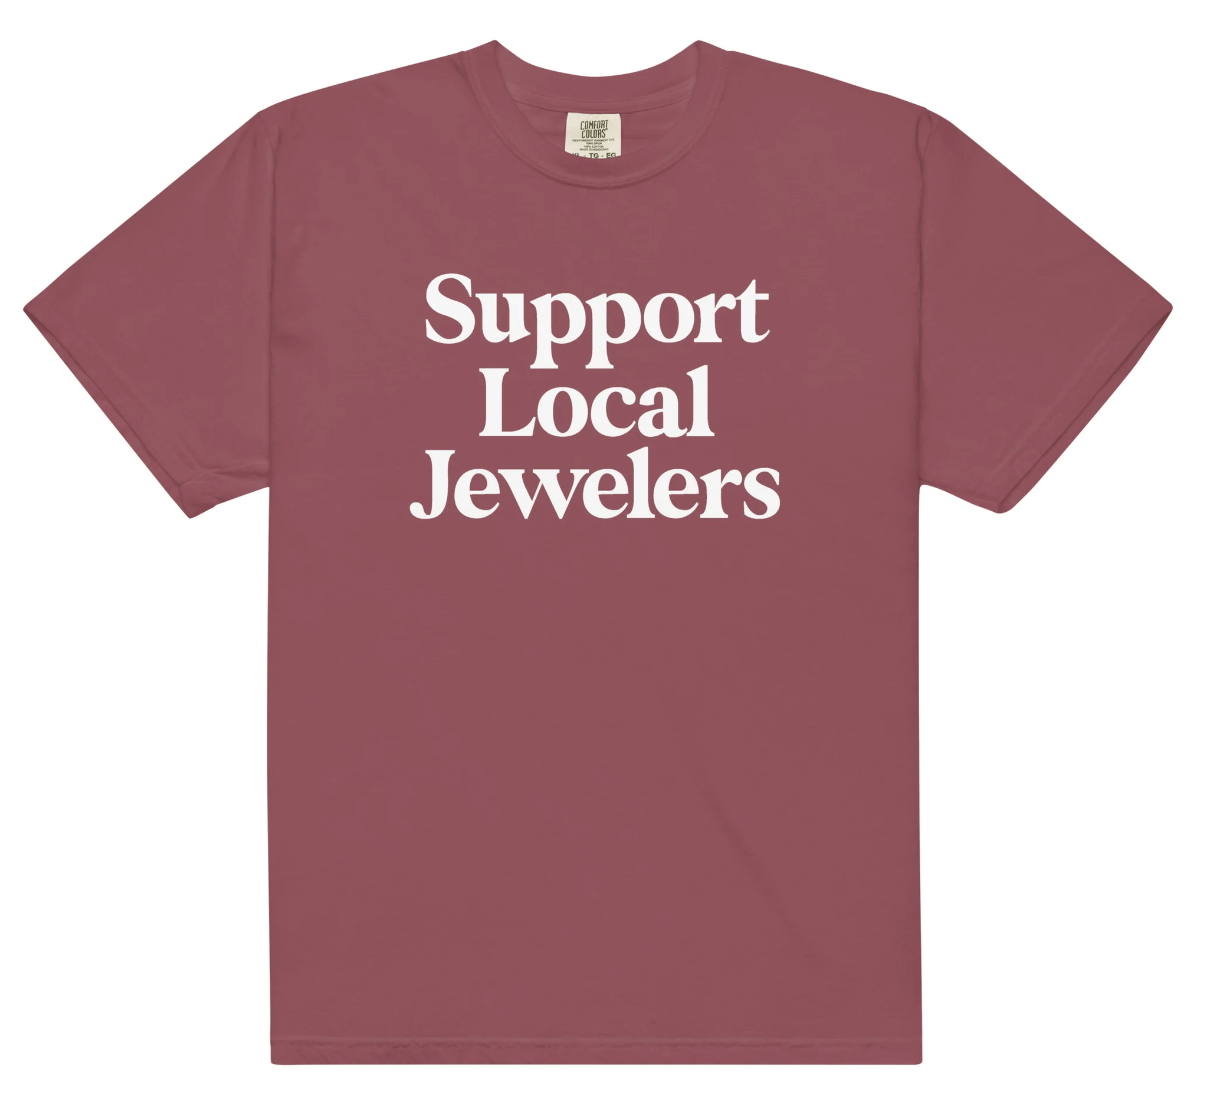 Support Local Jewelers T-shirt